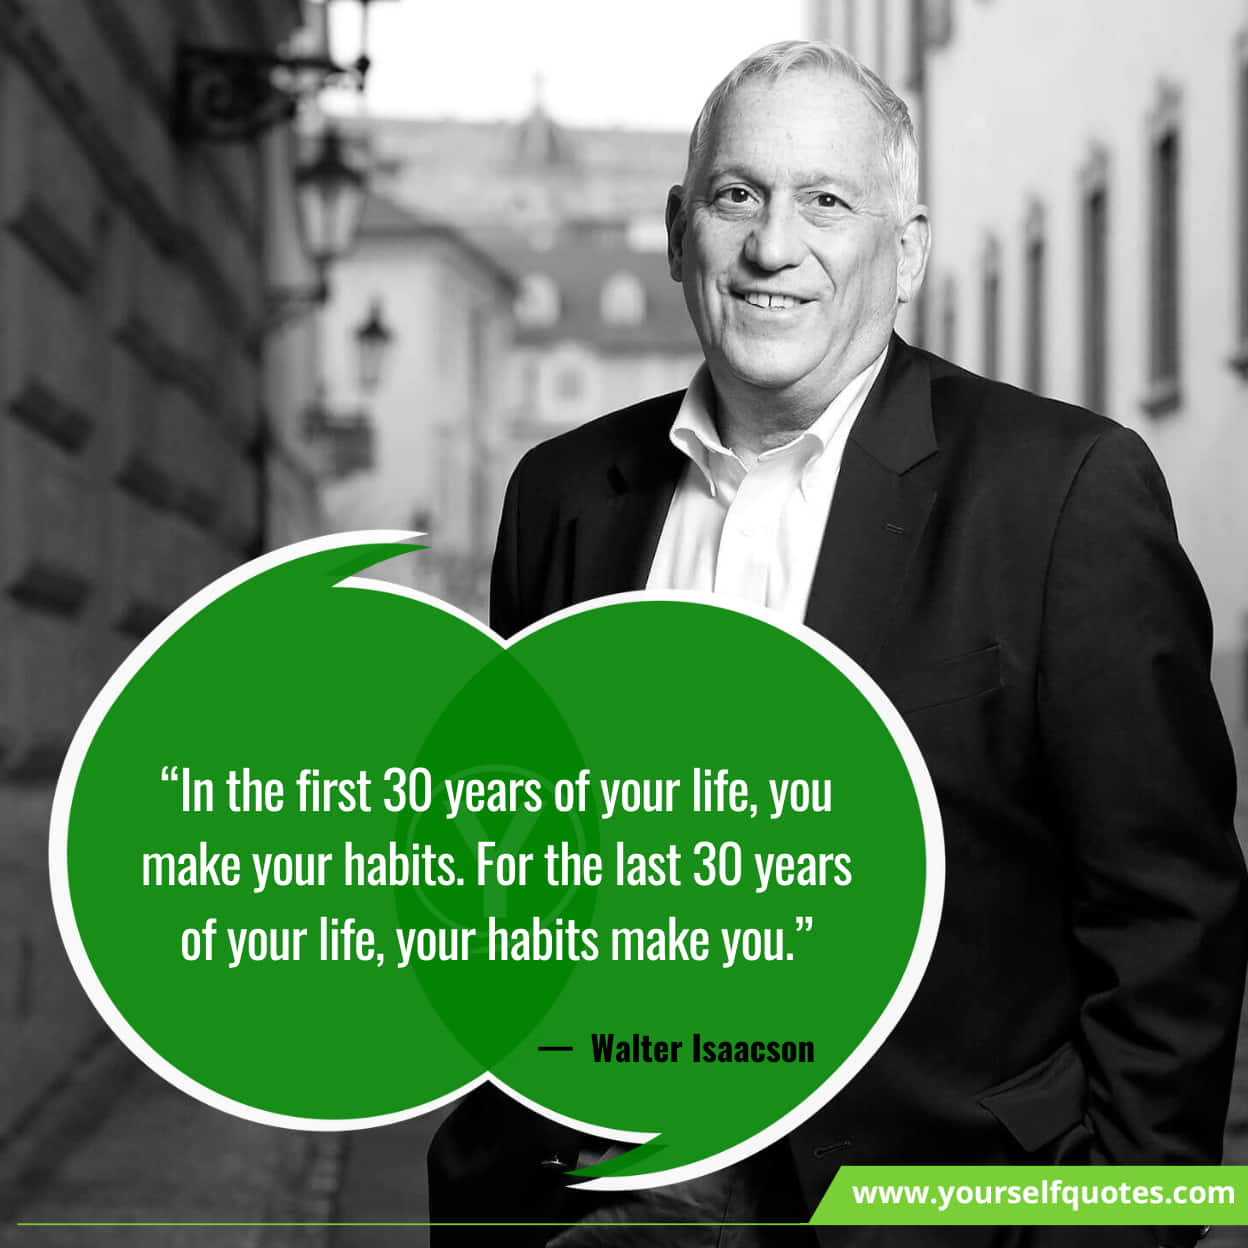 Walter Isaacson Quotes On Life